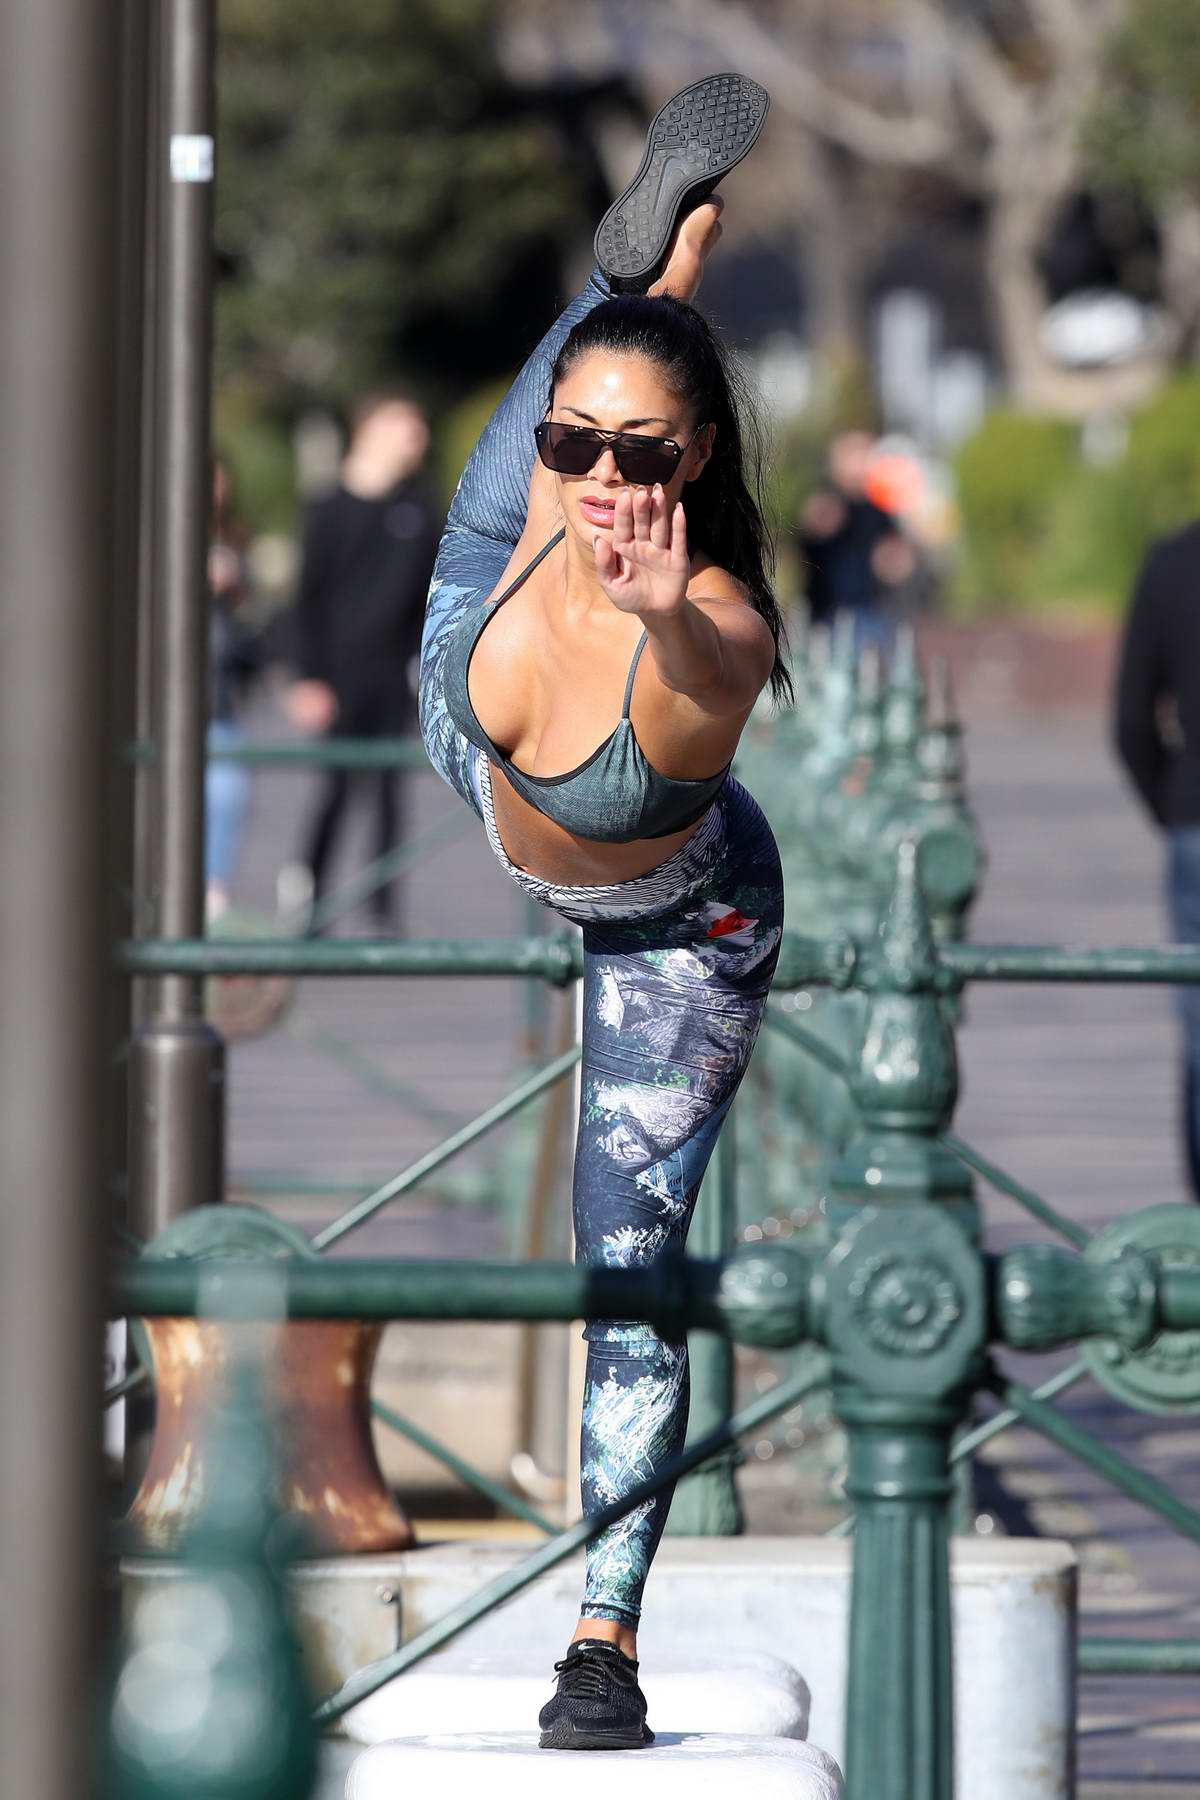 Nicole Scherzinger Shows Off Her Incredible Figure In A Sports Bra And Leggings While Practicing